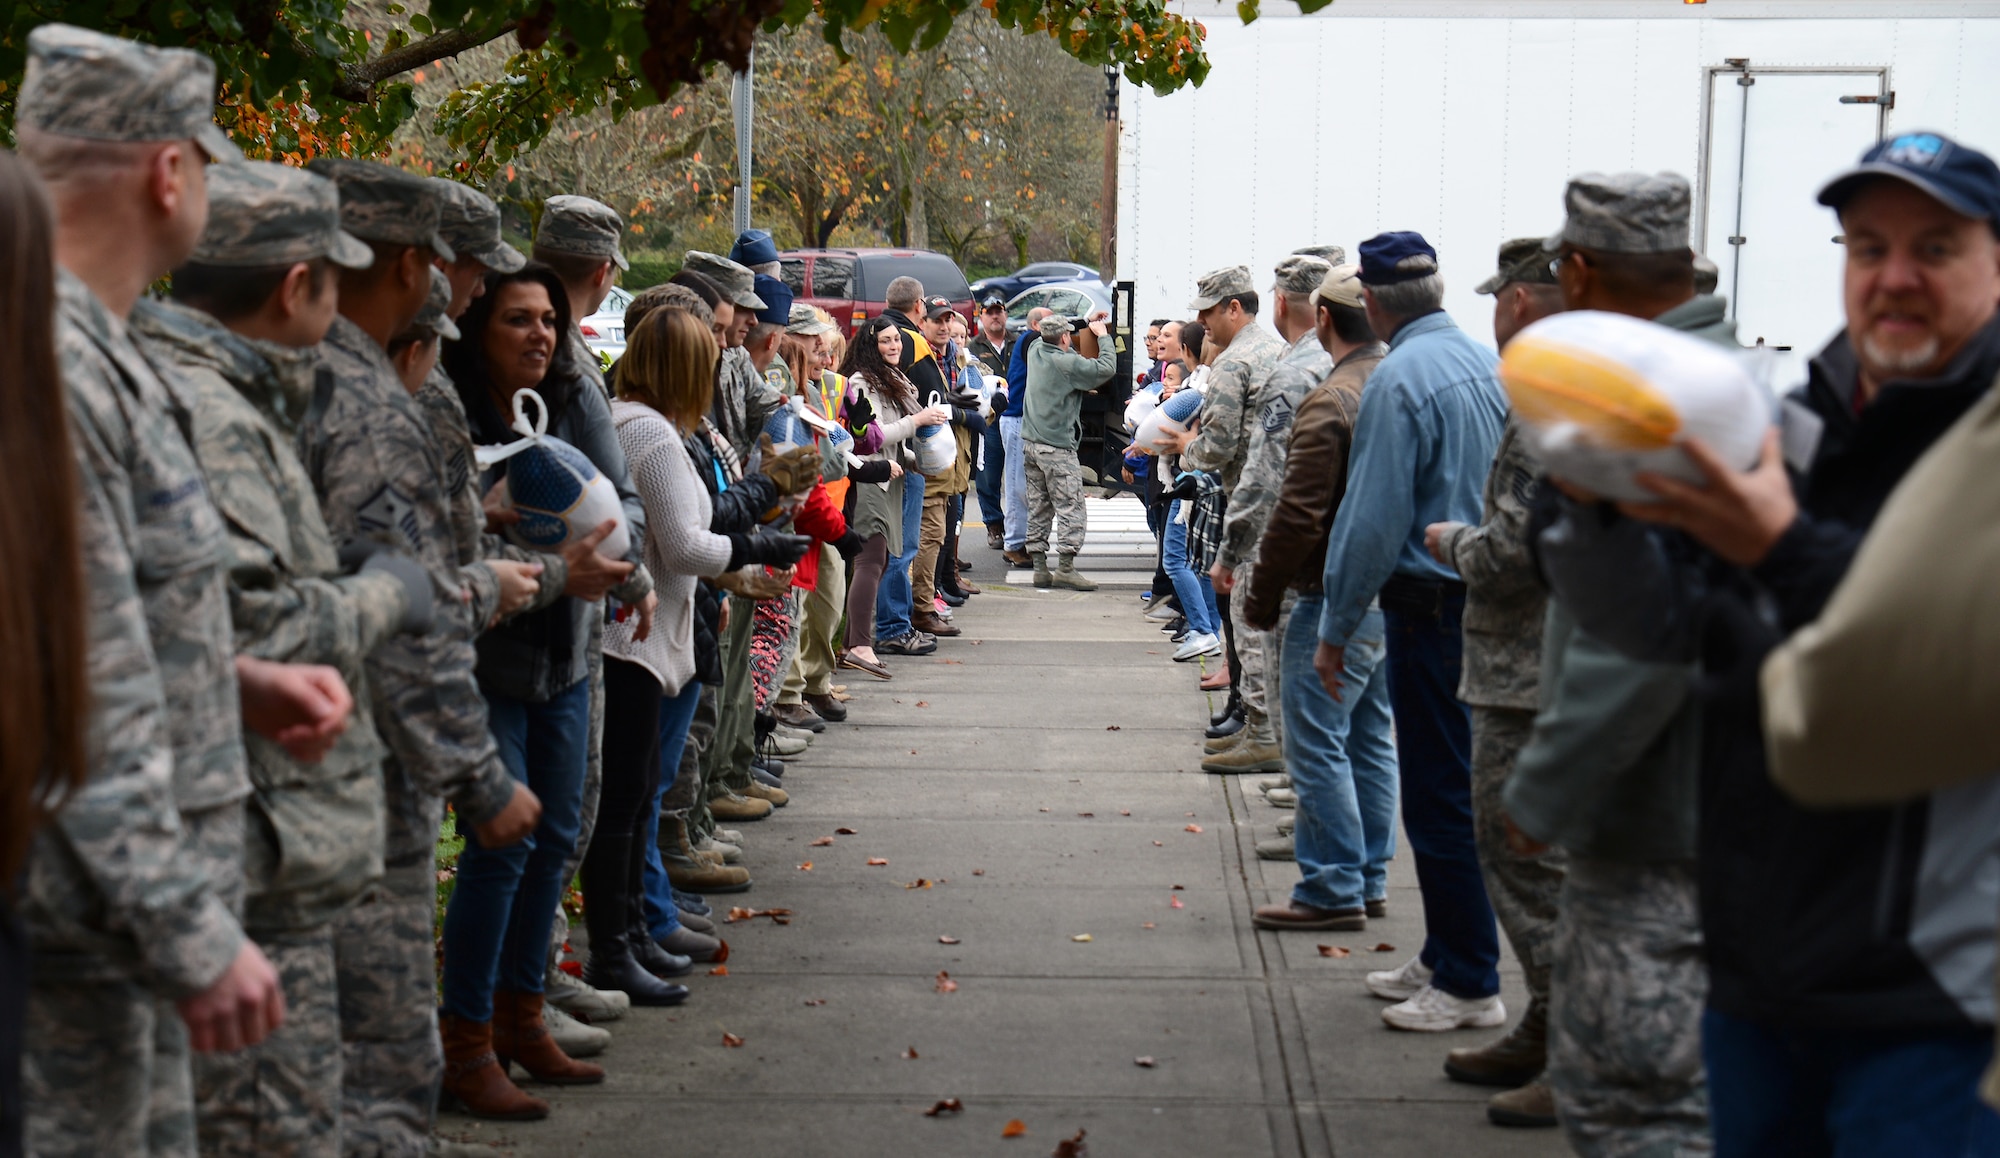 Community partners and Team McChord leadership unload turkeys during the Annual Operation Turkey Drop, Nov. 18, 2016 at Joint Base Lewis-McChord, Wash. Community partners donated 132 turkeys to active duty Team McChord Airmen during this year’s event. (U.S. Air Force photo/Senior Airman Jacob Jimenez)       